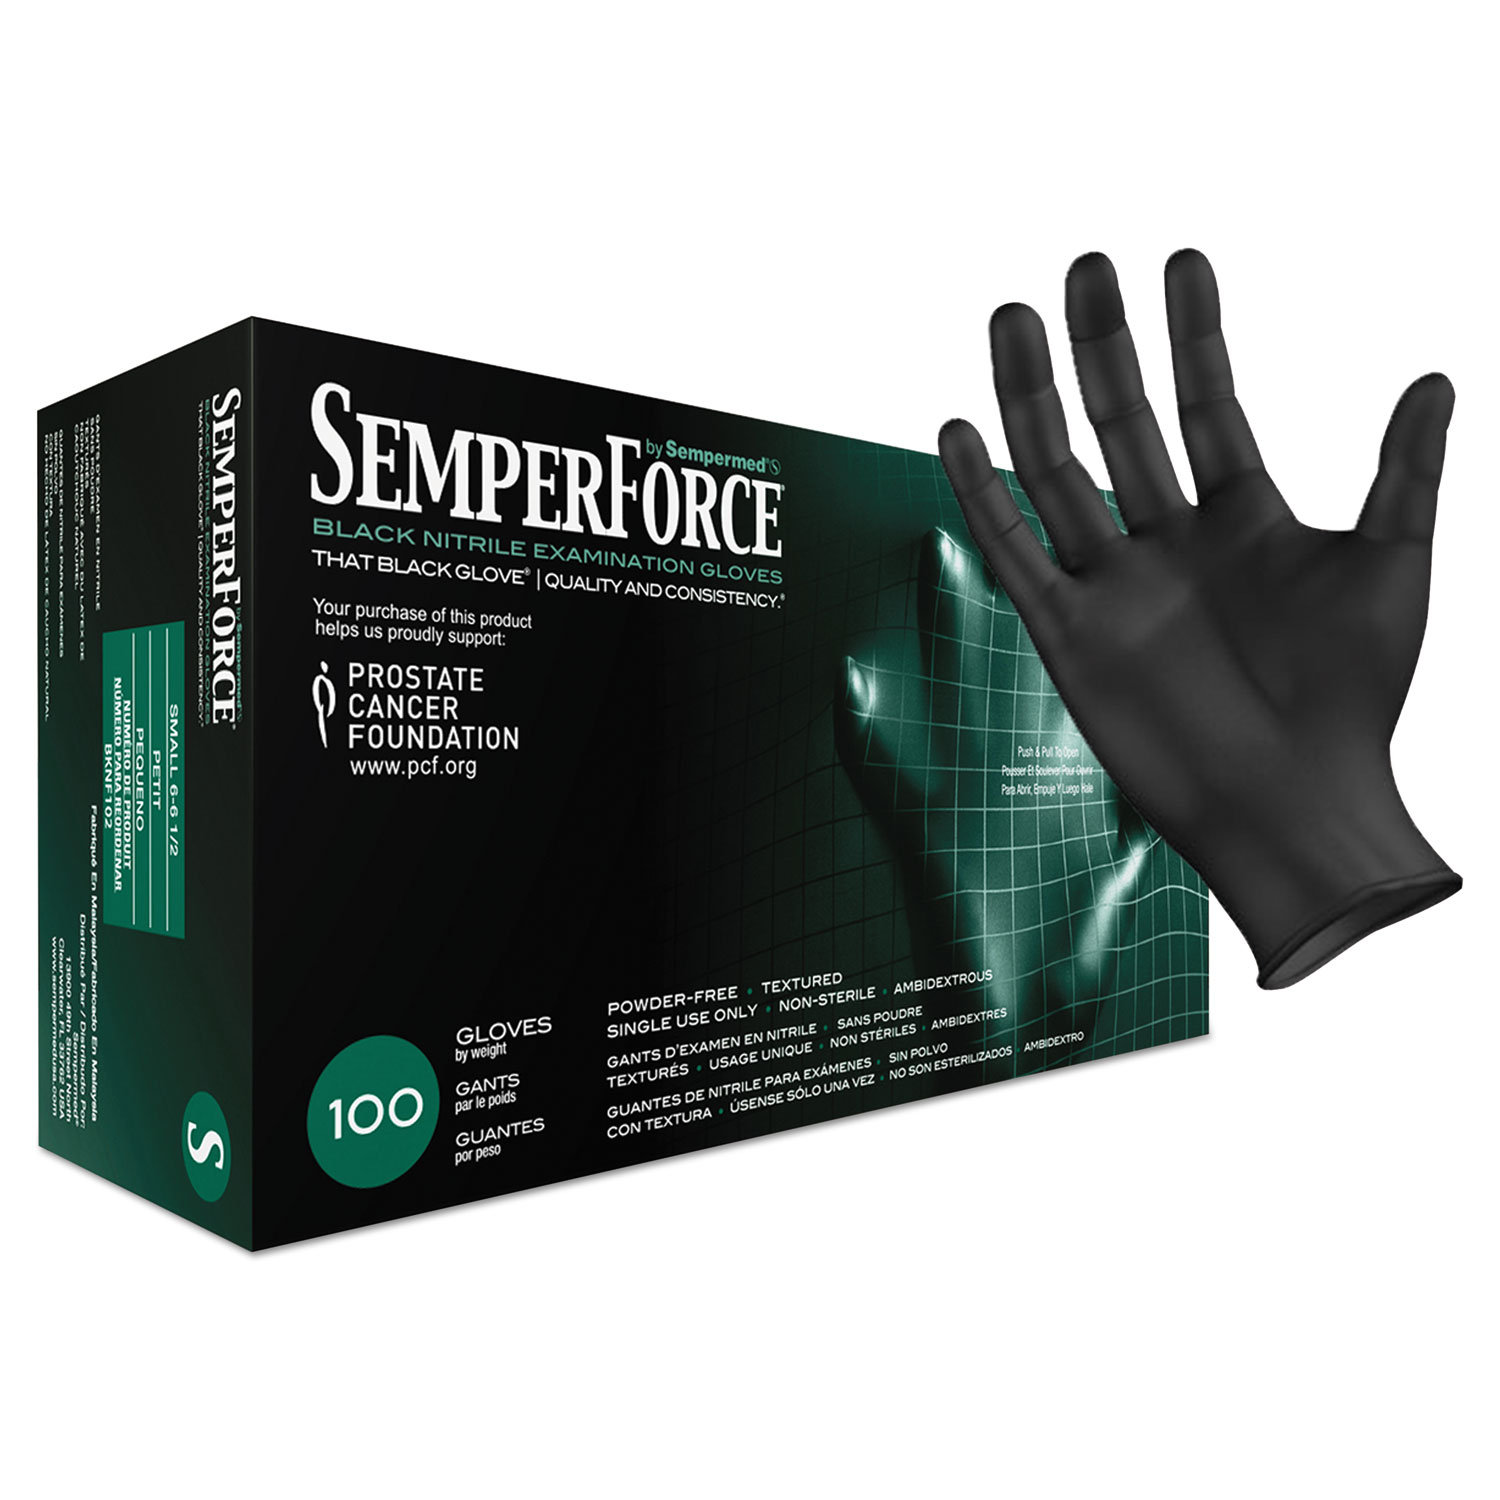  SemperForce BKNF102 SemperForce Gloves, Black, Small, 1000/Carton (SEZBKNF102) 